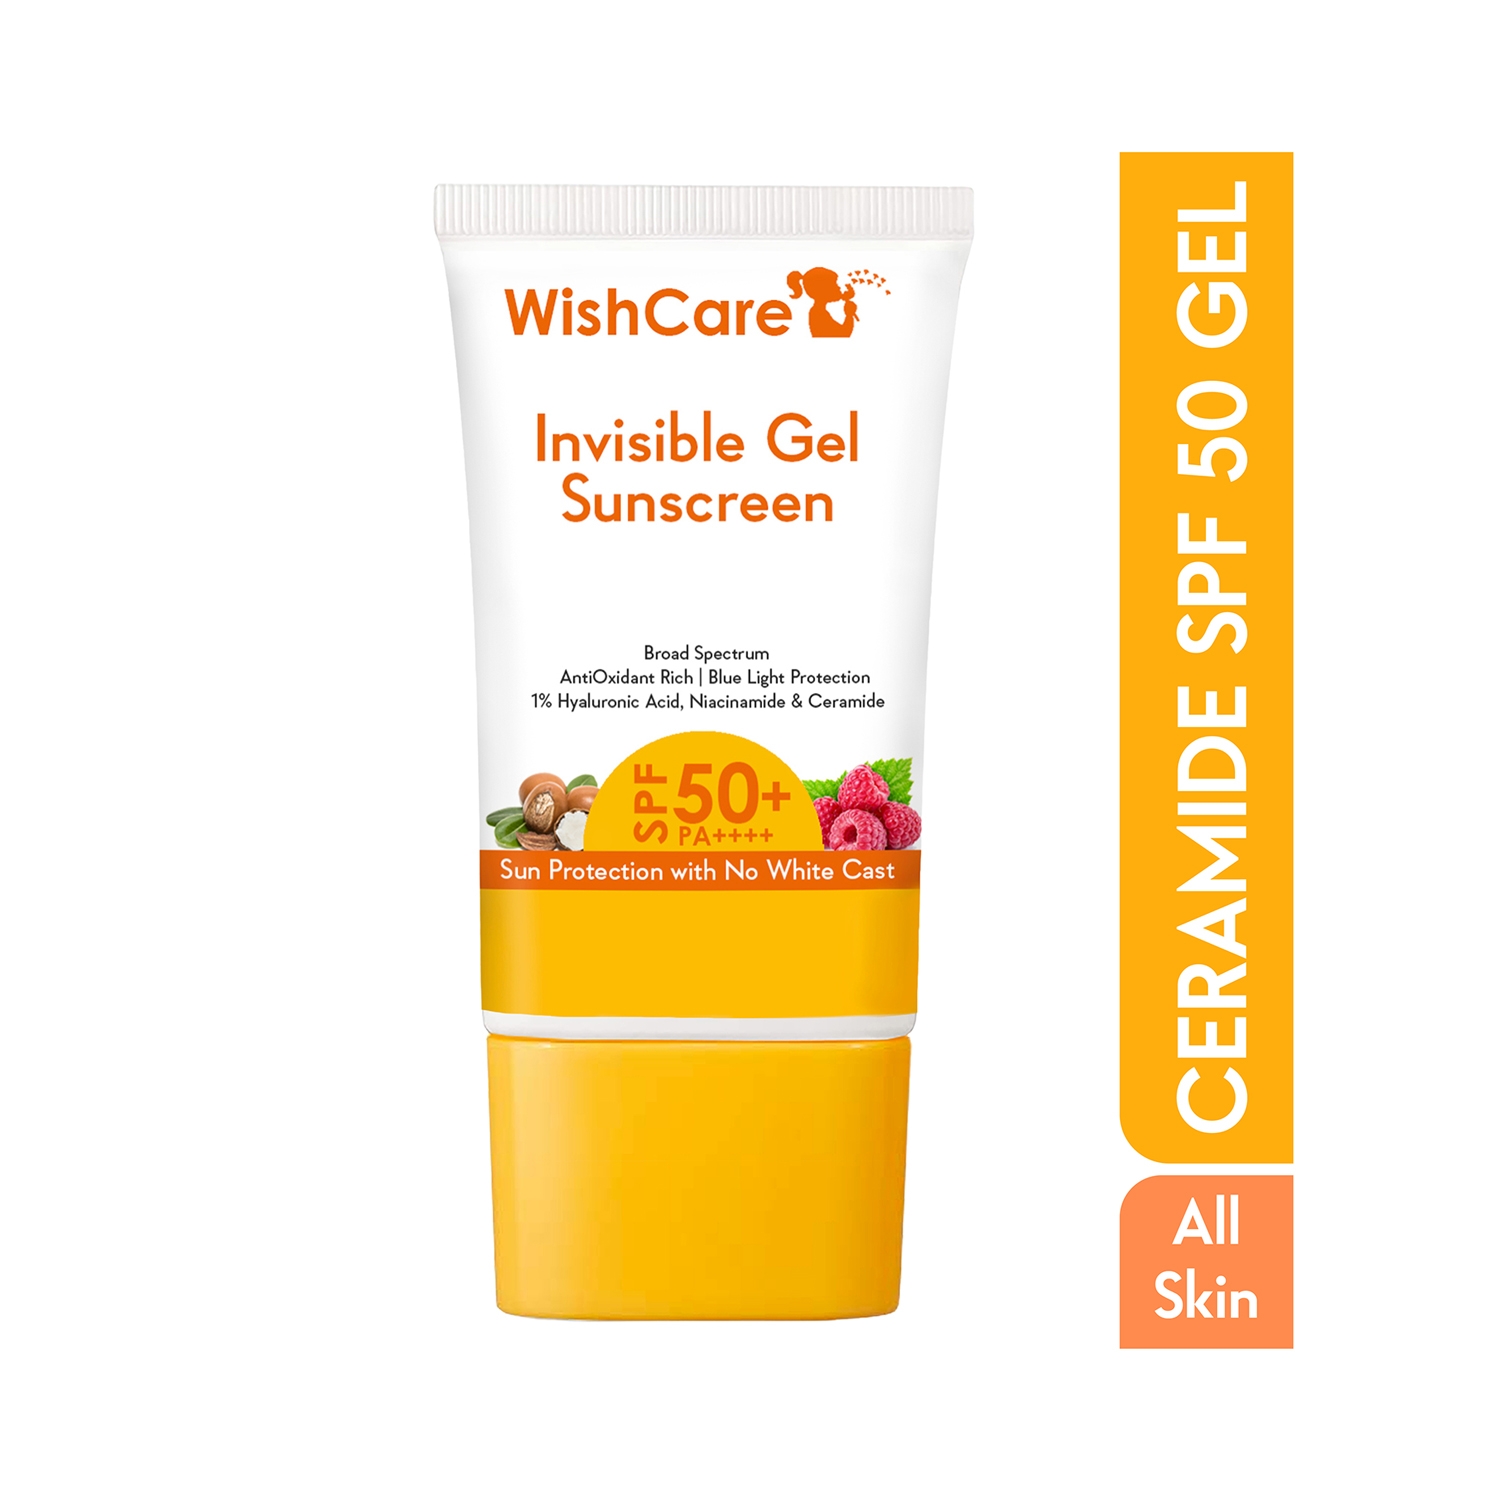 WishCare | WishCare Invisible Gel Sunscreen SPF 50+ PA++++ - Broad Spectrum Protection with No White Cast (50 g)